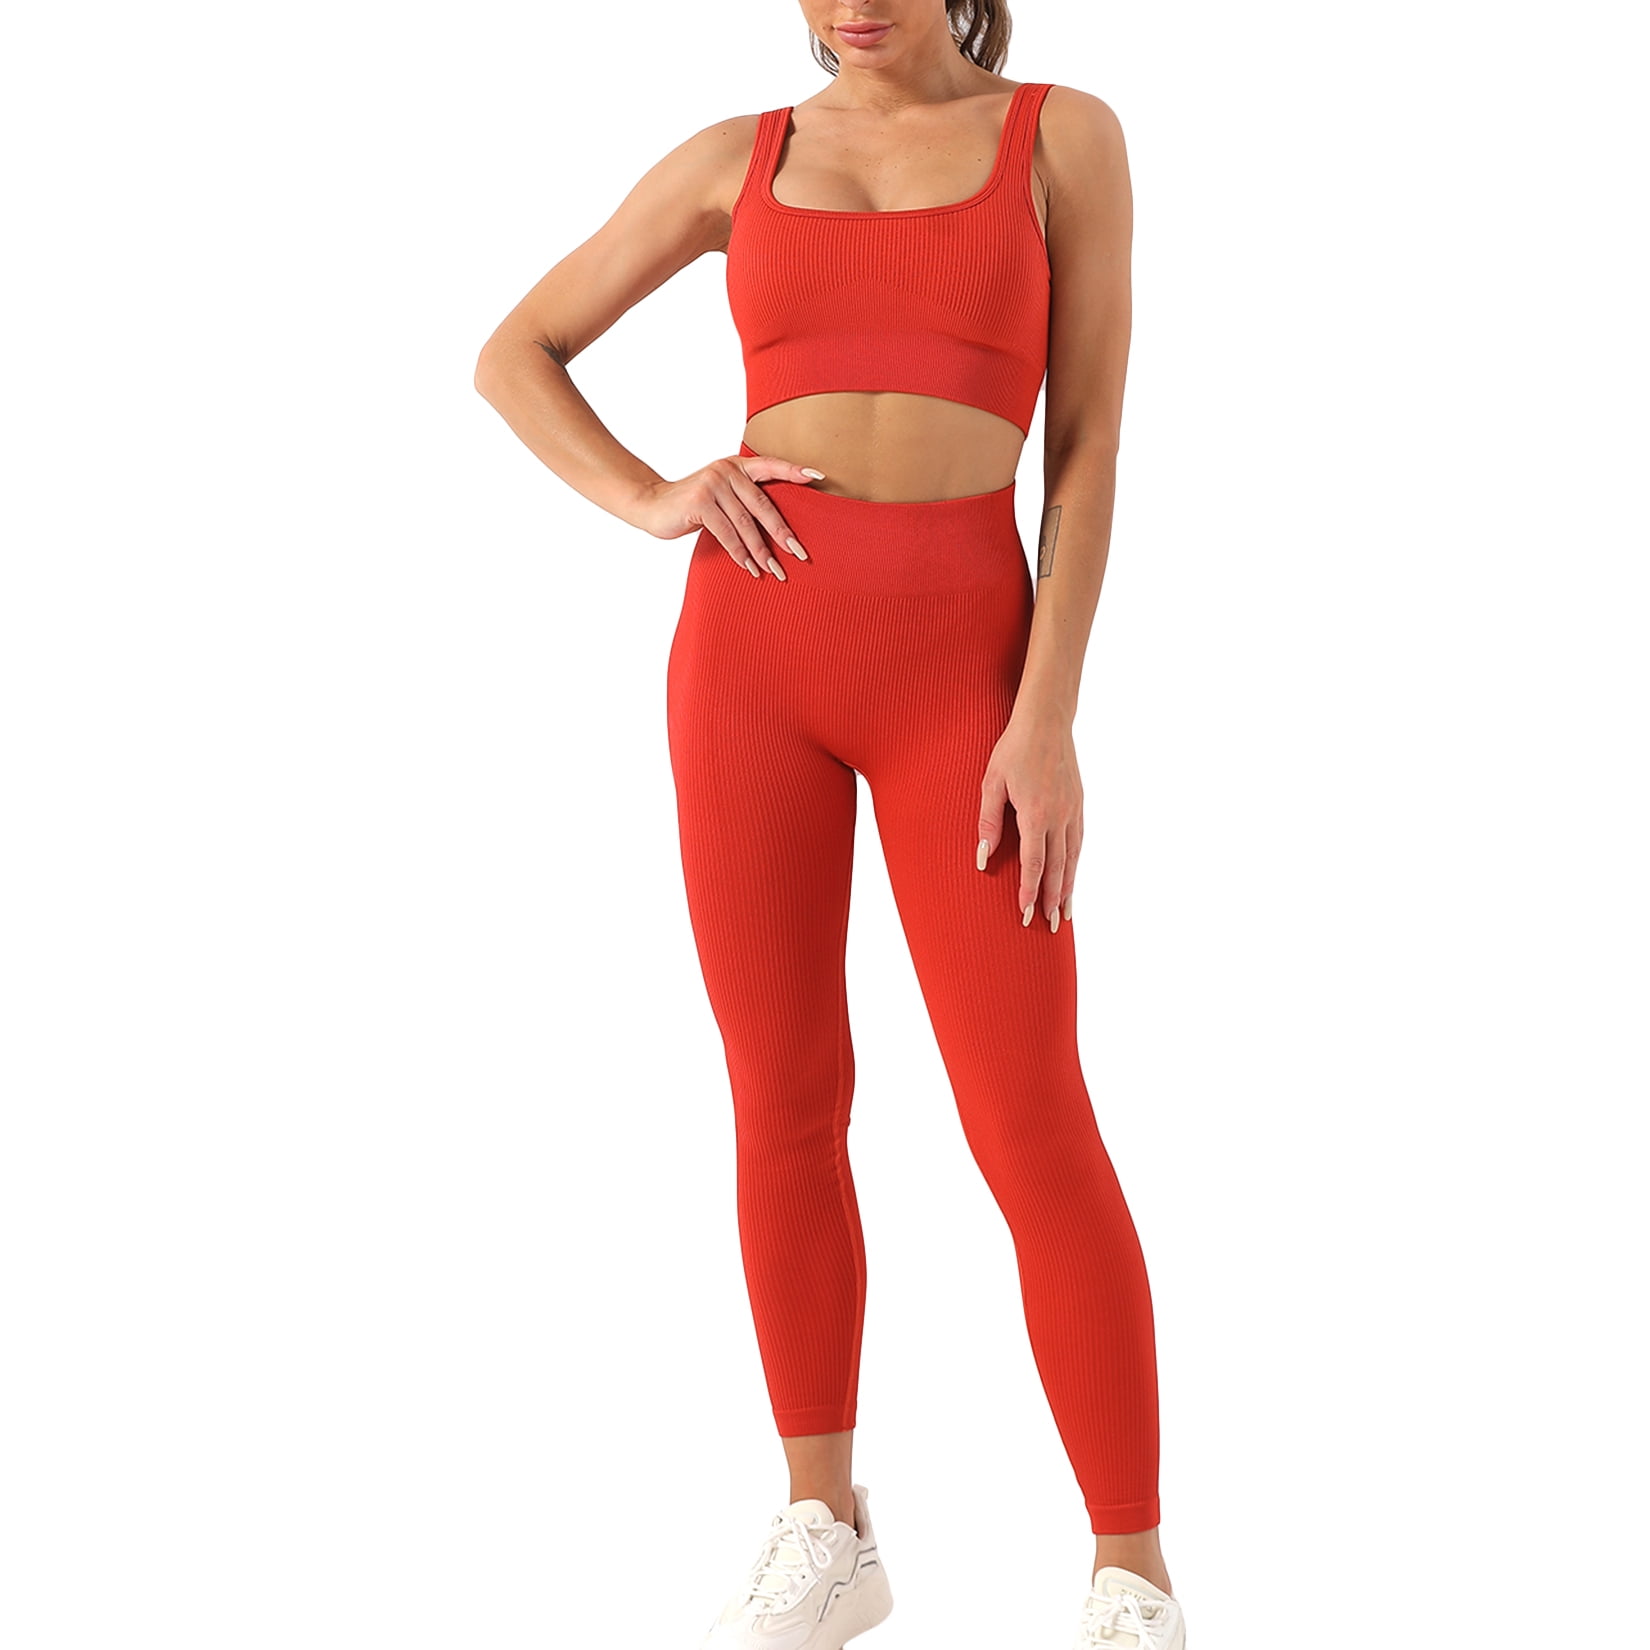 Lu's Chic Women's 2 Piece Workout Set Outfits Crop Tank Top High Waisted  Yoga Leggings Activewear Athletic Workout Sporty 2Pcs Sexy Lounge Sets Red  Medium 